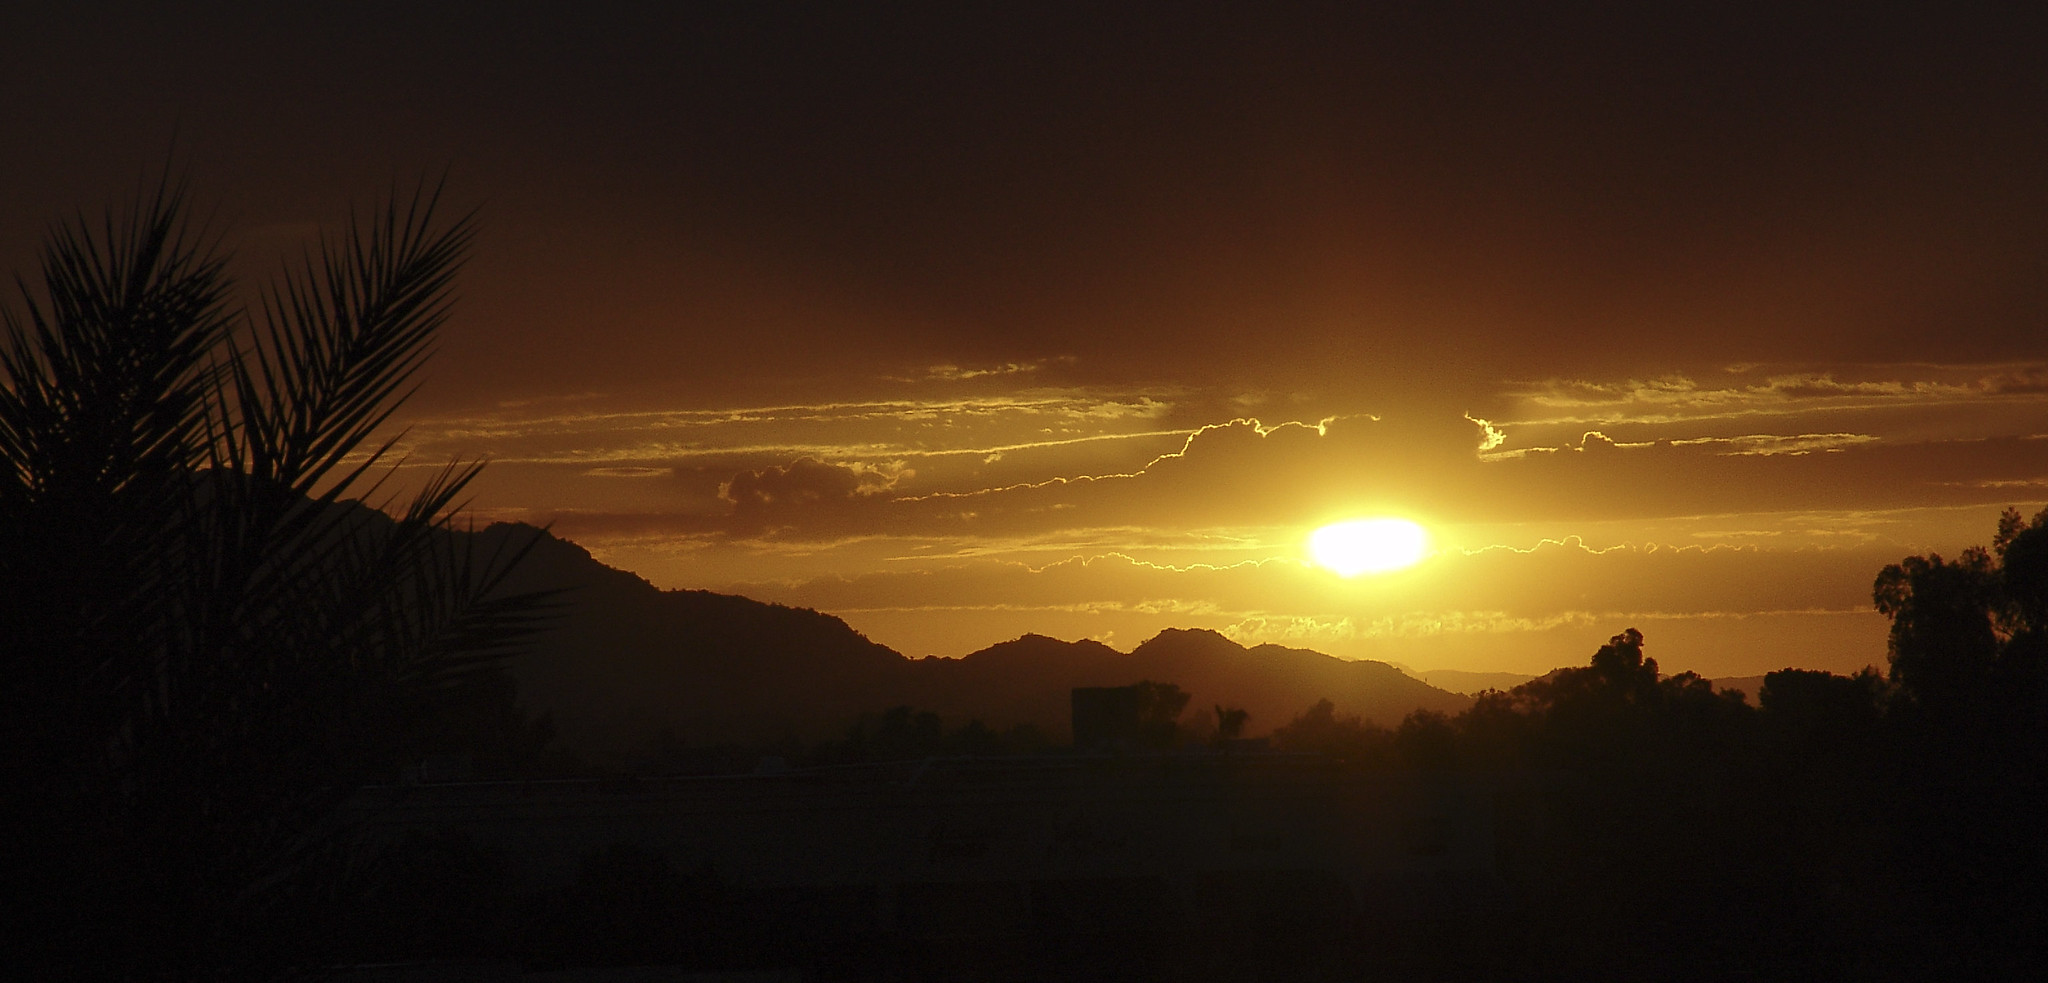 The golden sun sets over Phoenix, Arizona, reminding us that all will be okay as long as the sun sets and sun rises, the coronavirus won't beat us.